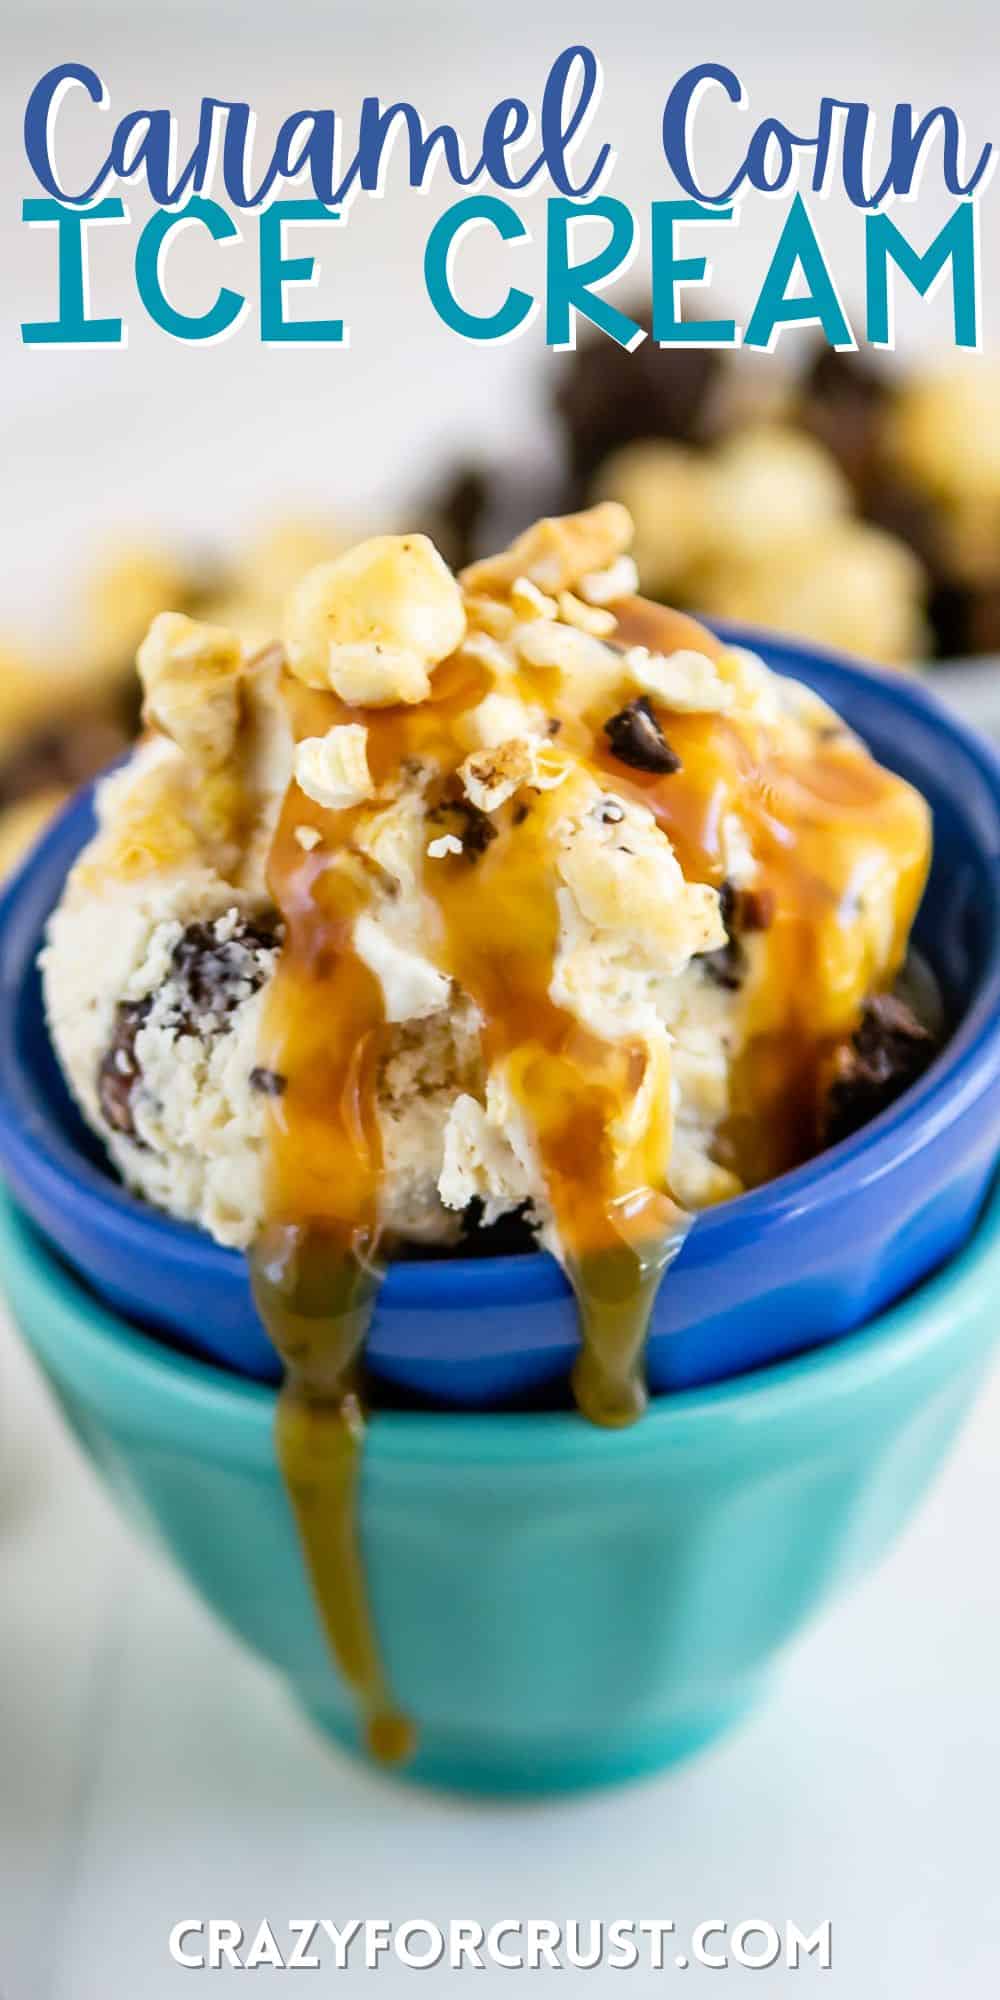 stacked blue bowls with ice cream in the bowls topped with caramel with words on the image.